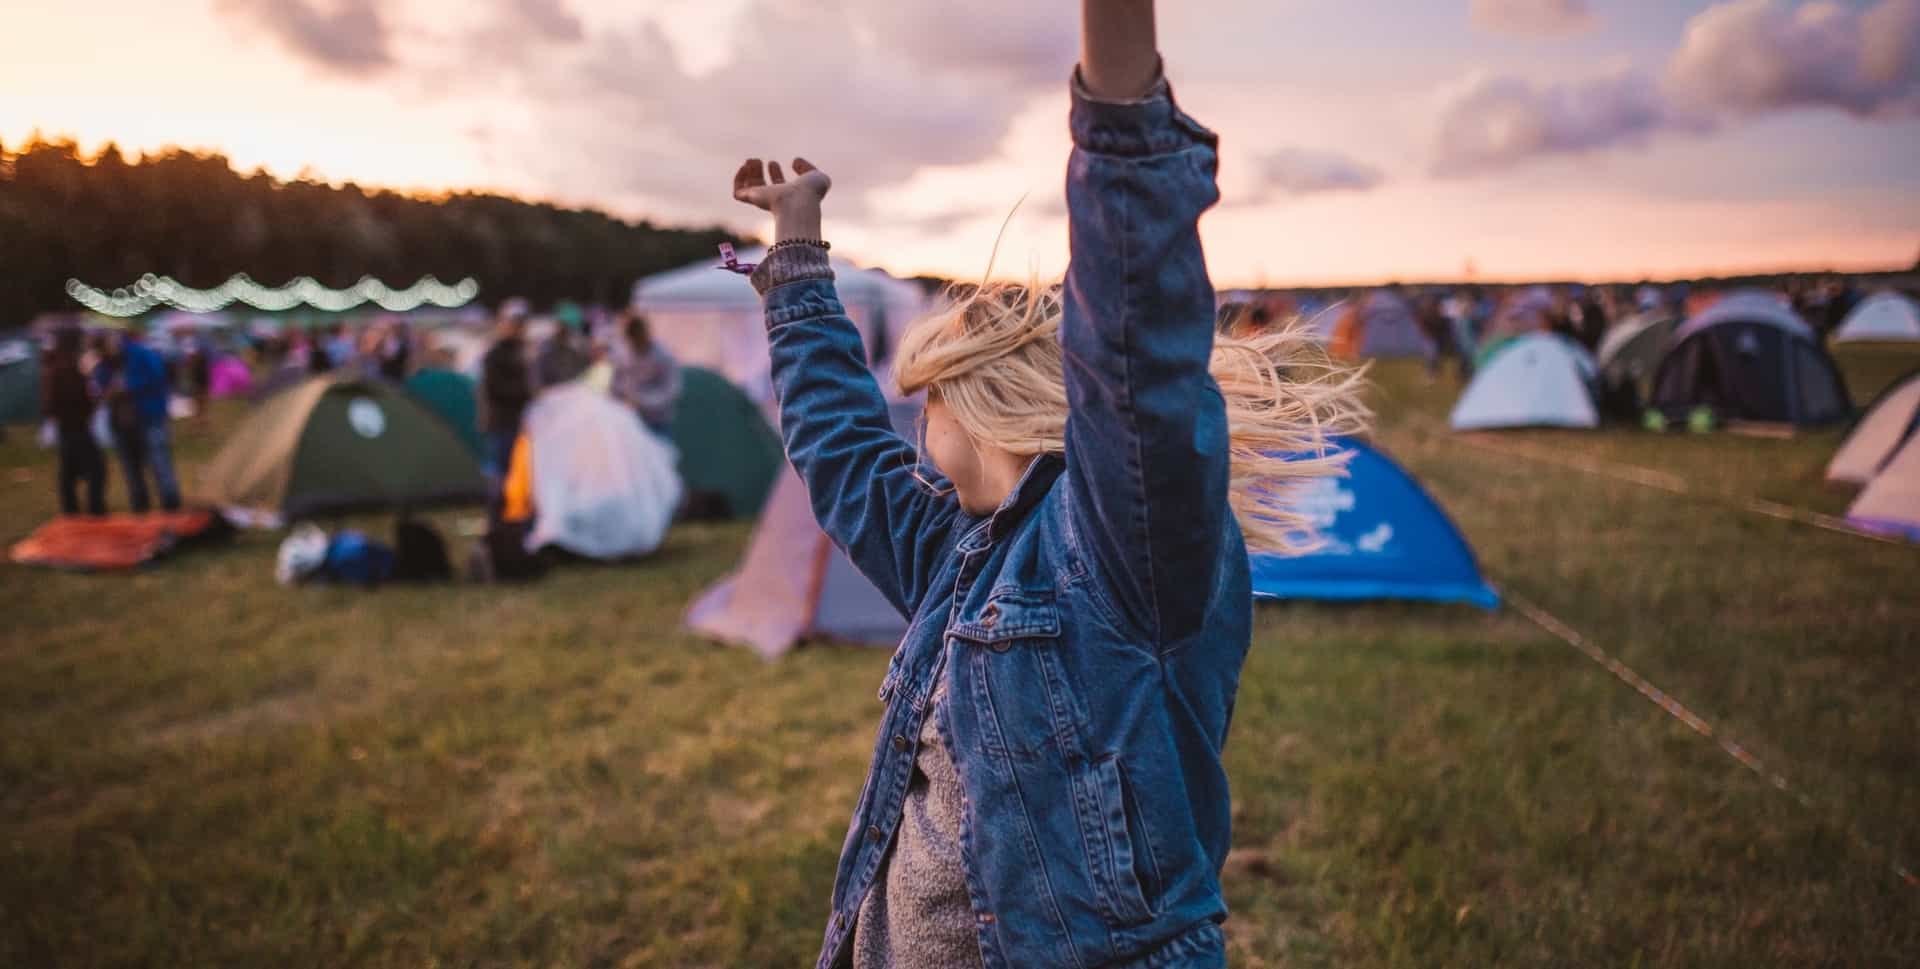 Woman Dancing In Front Of Instant Tent At Festival